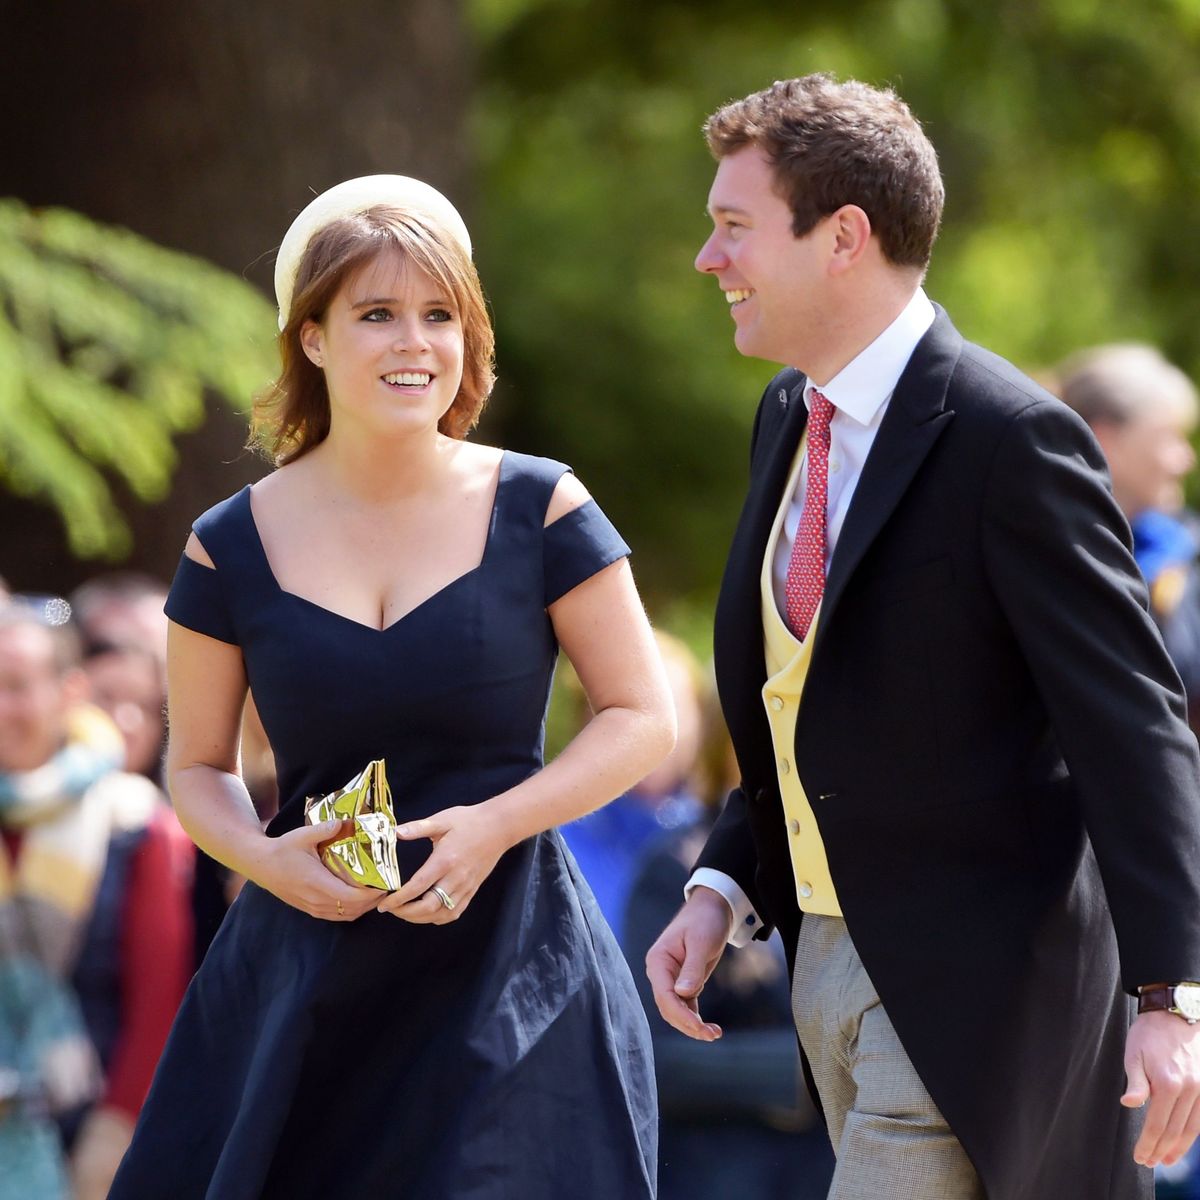 What Do Princess Eugenie's Wedding Invitations Look Like? - Eugenie and ...